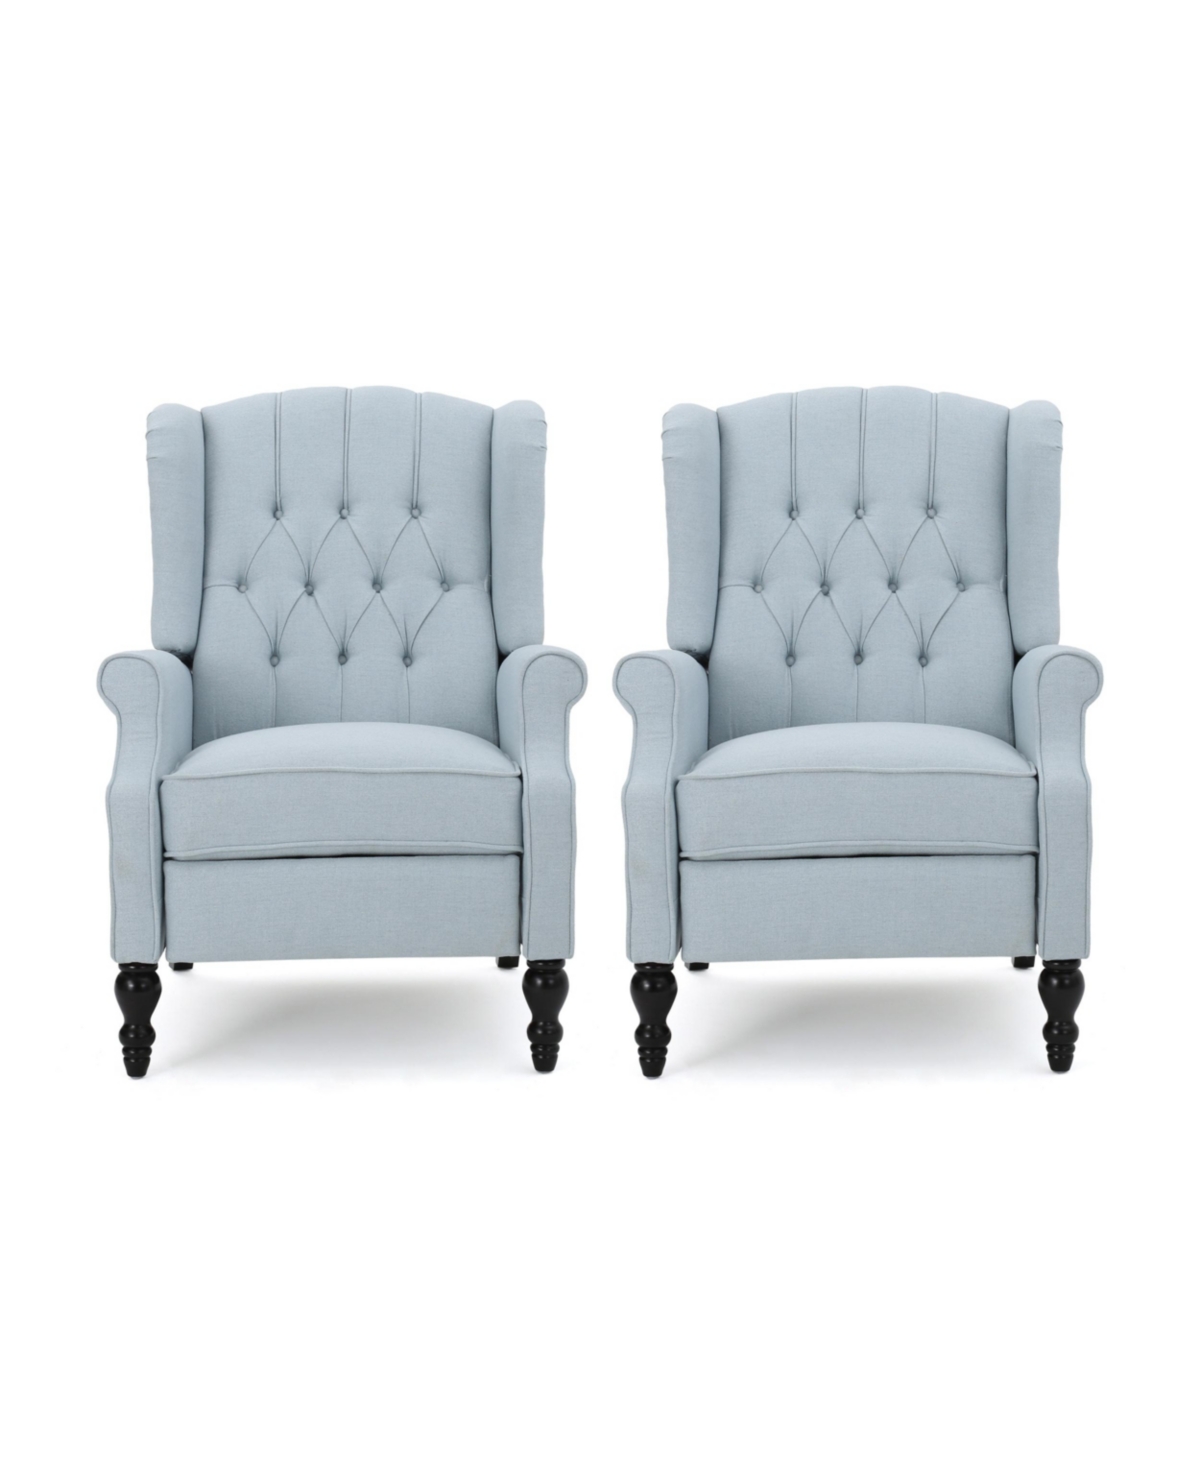 Noble House Walter Contemporary Tufted Recliner Set, 2 Piece In Light Sky